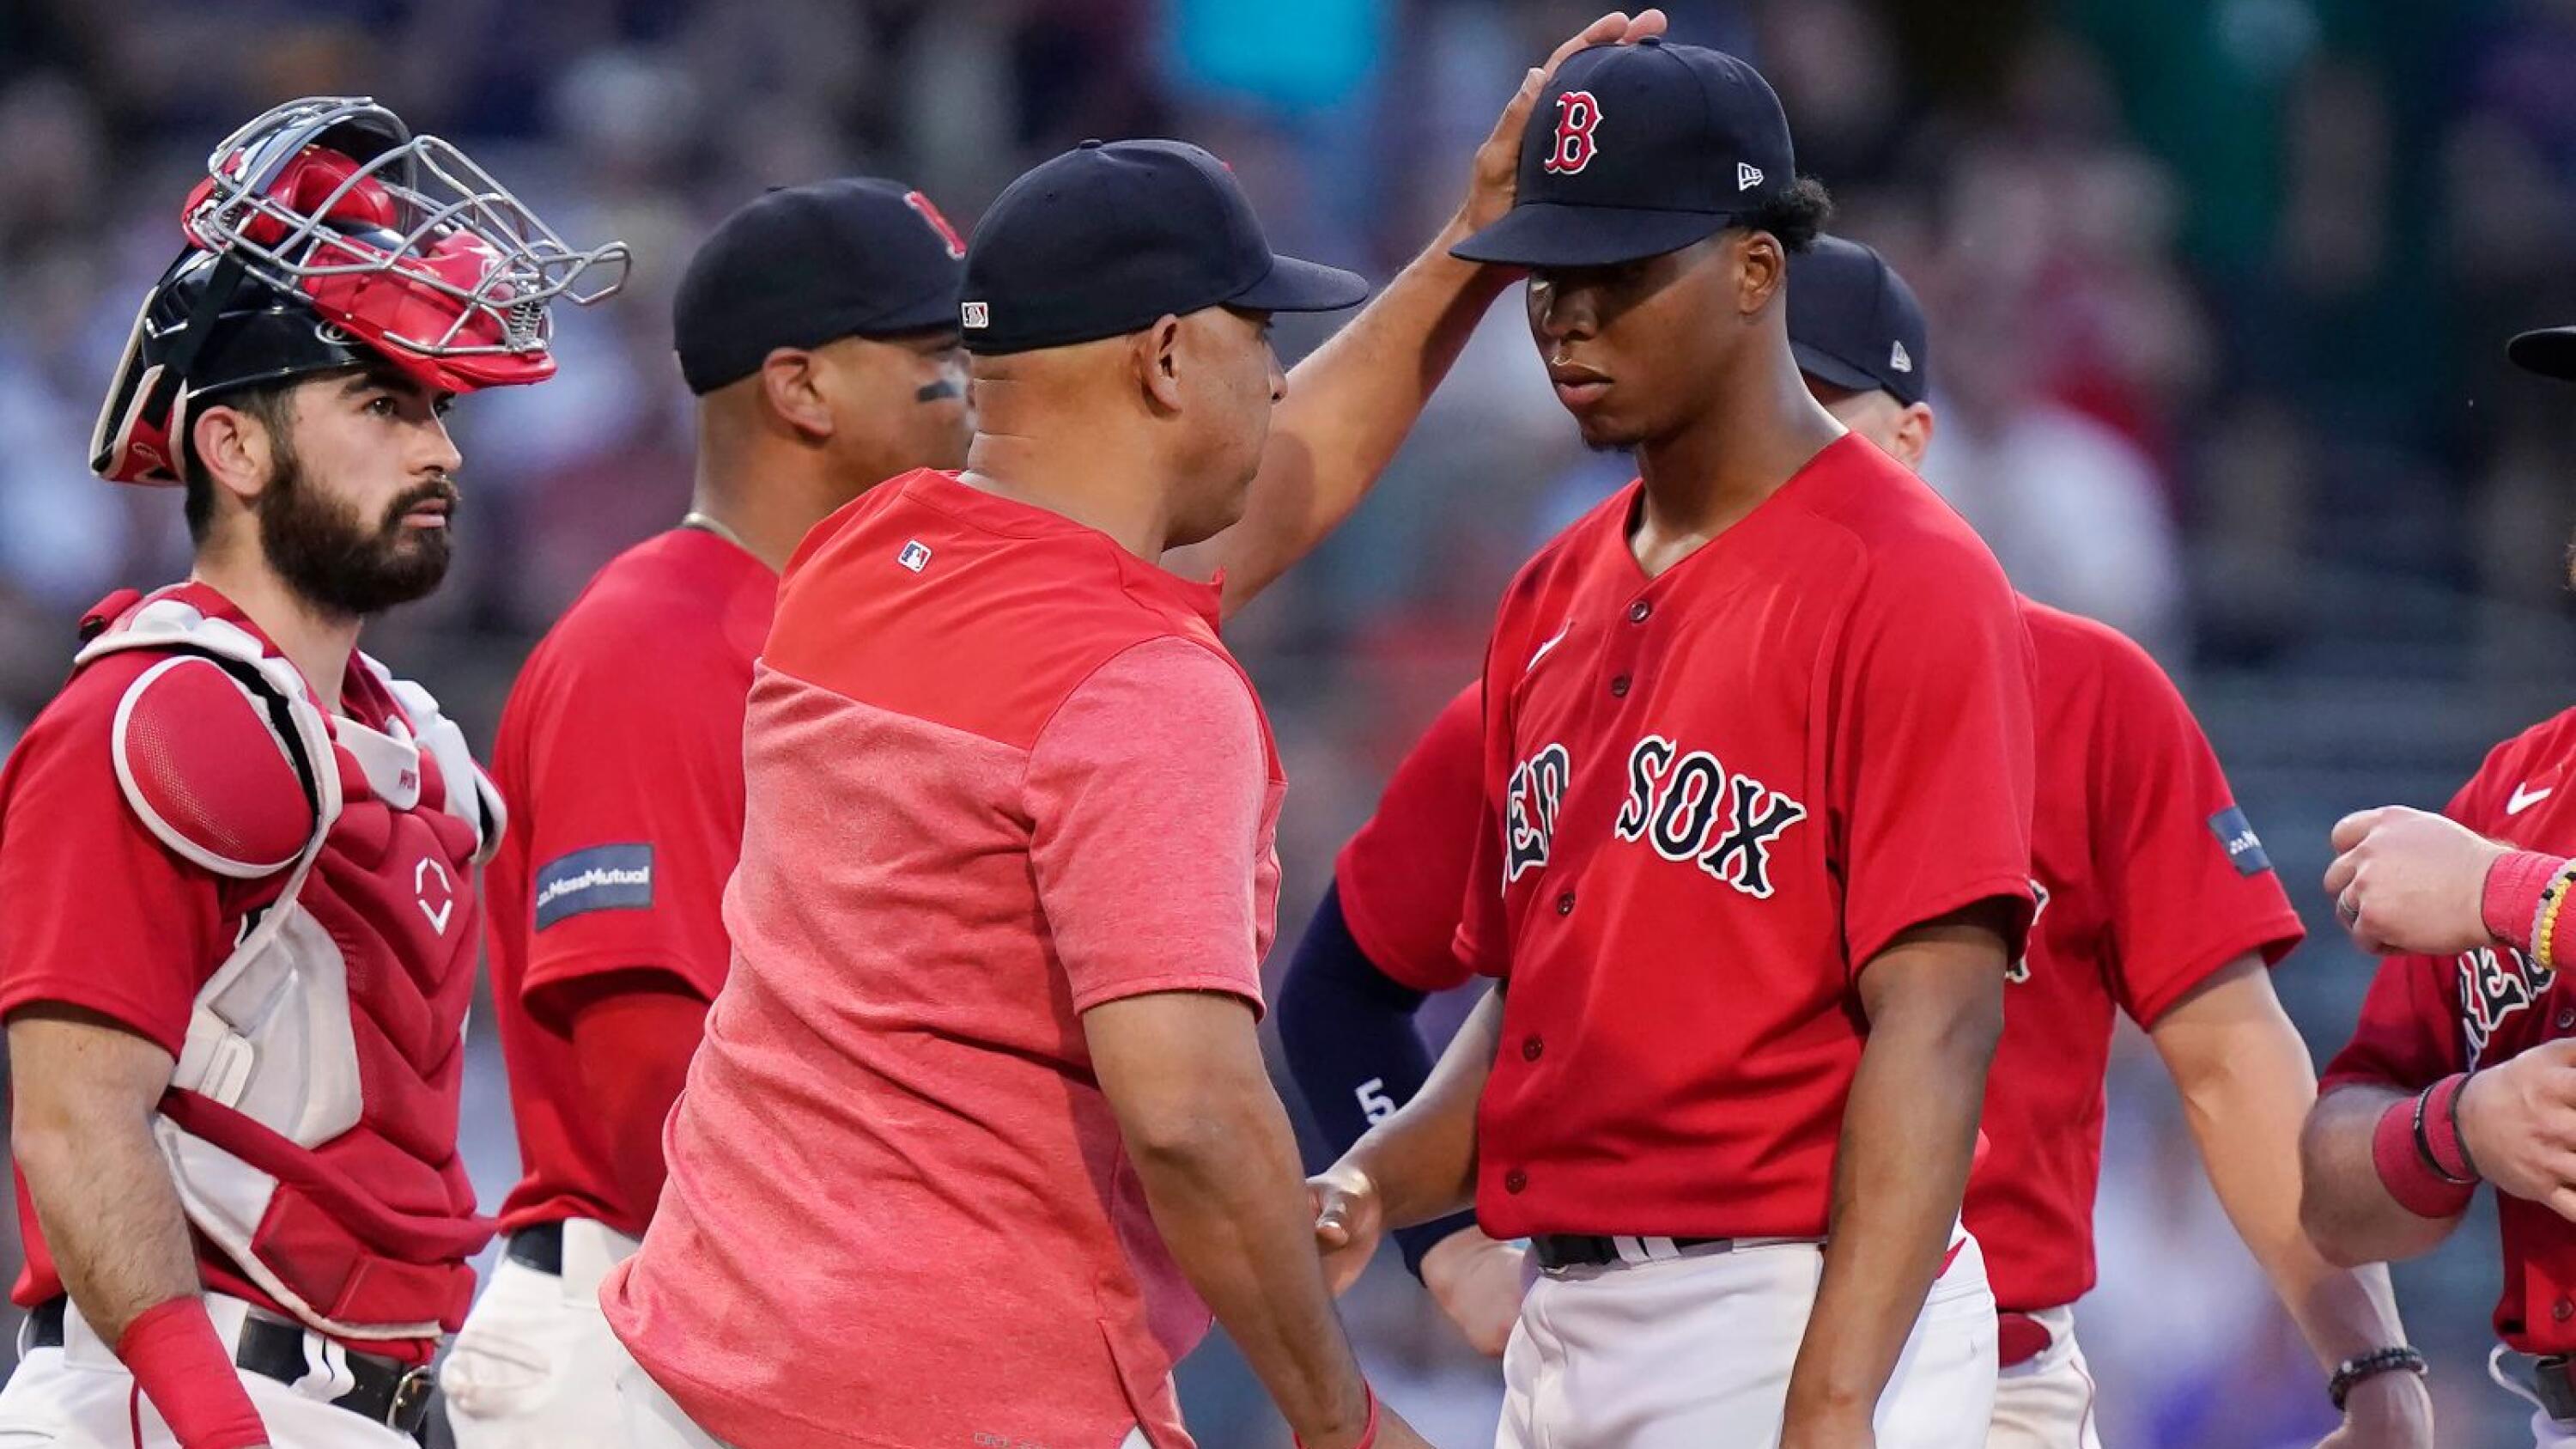 Bello gets first major league win as Red Sox beat Rangers